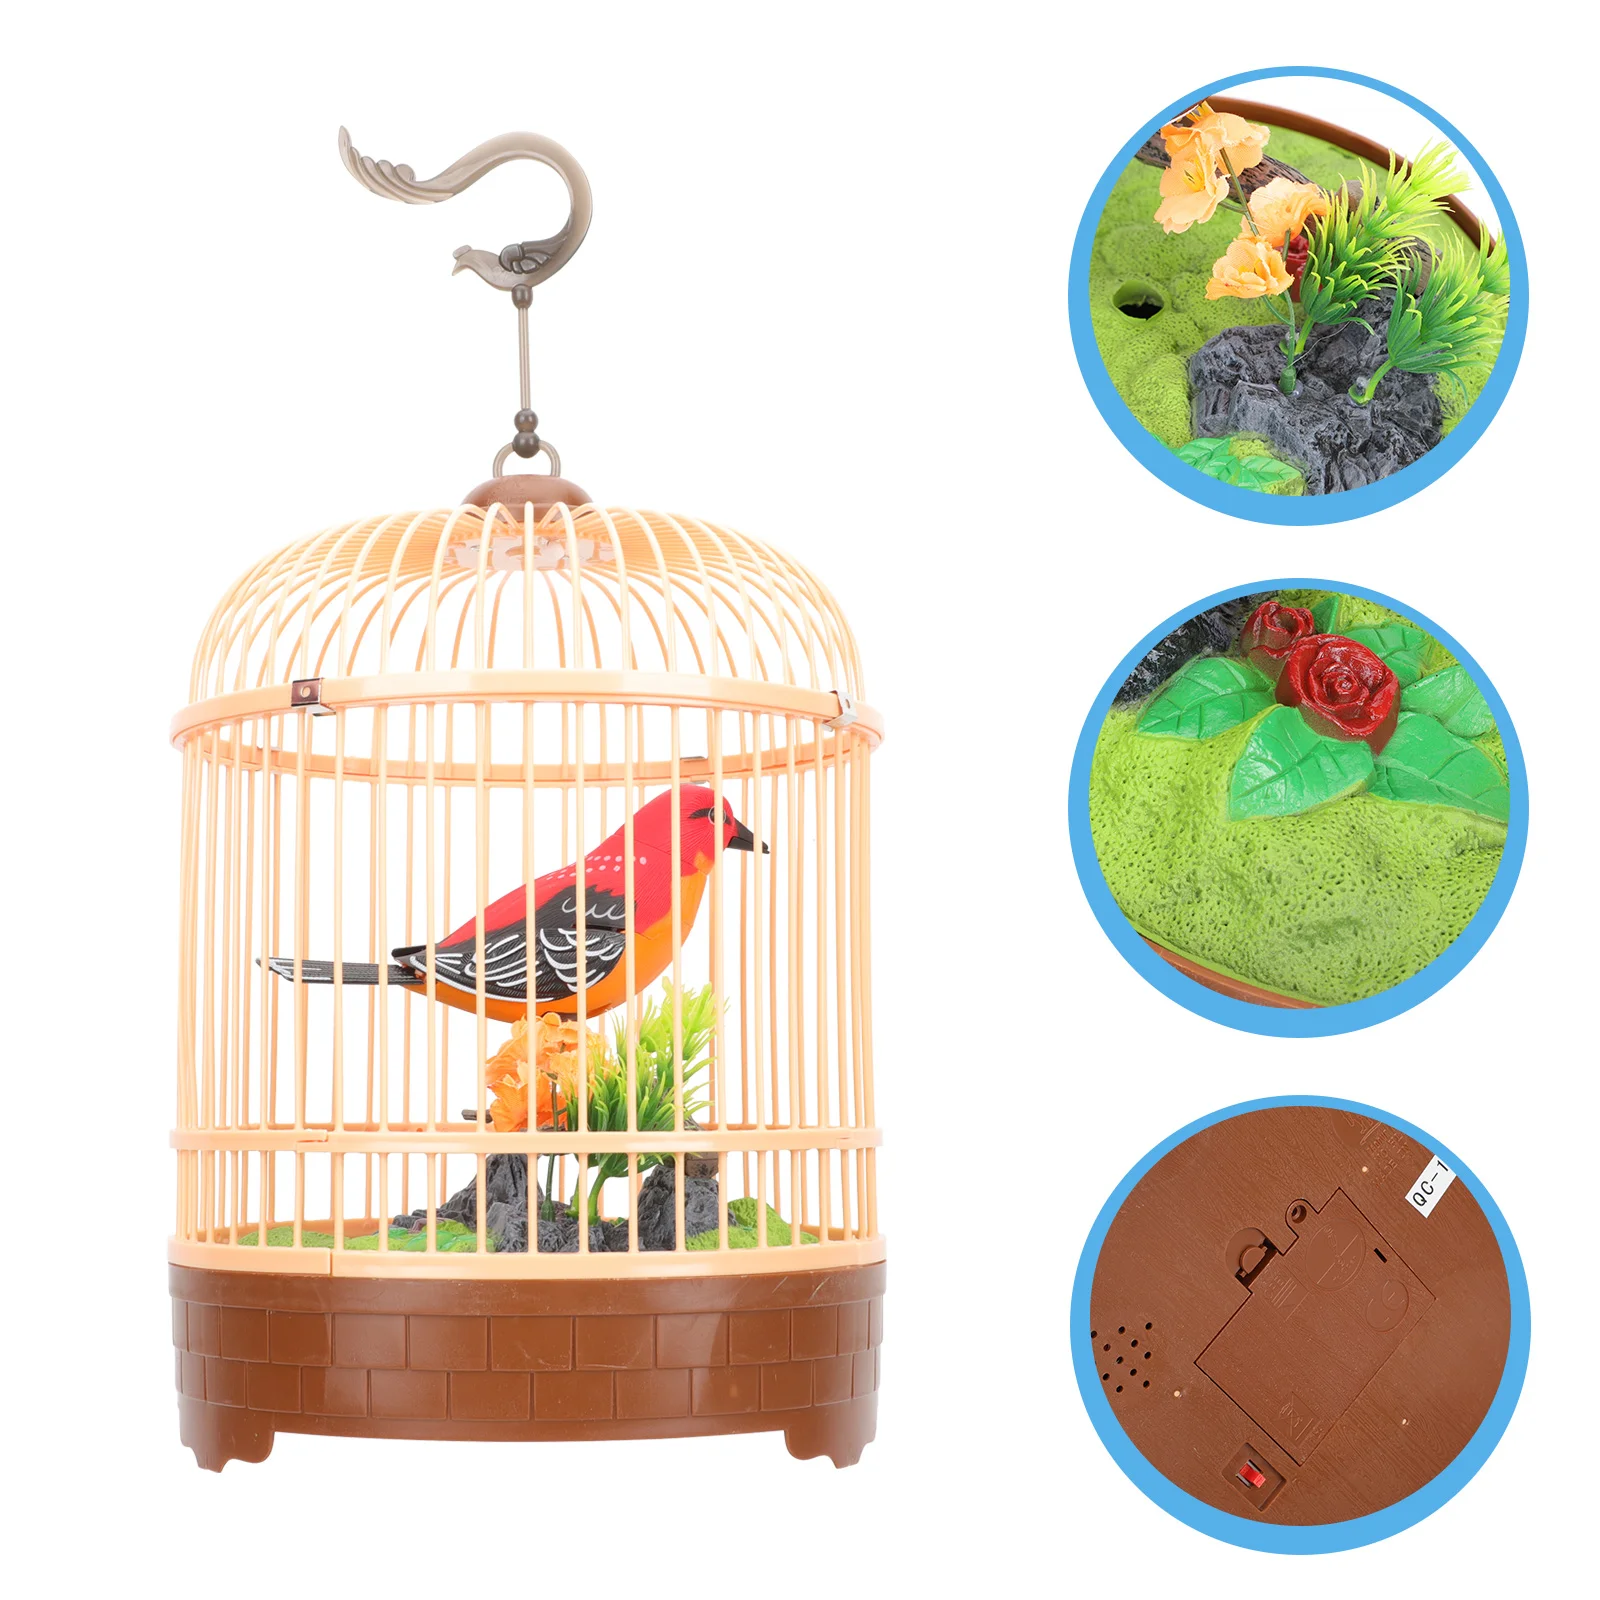 

Unique Bird Cage Toy Induction Birdcage Plaything Singing Plastic Educational Kids Voice-activated